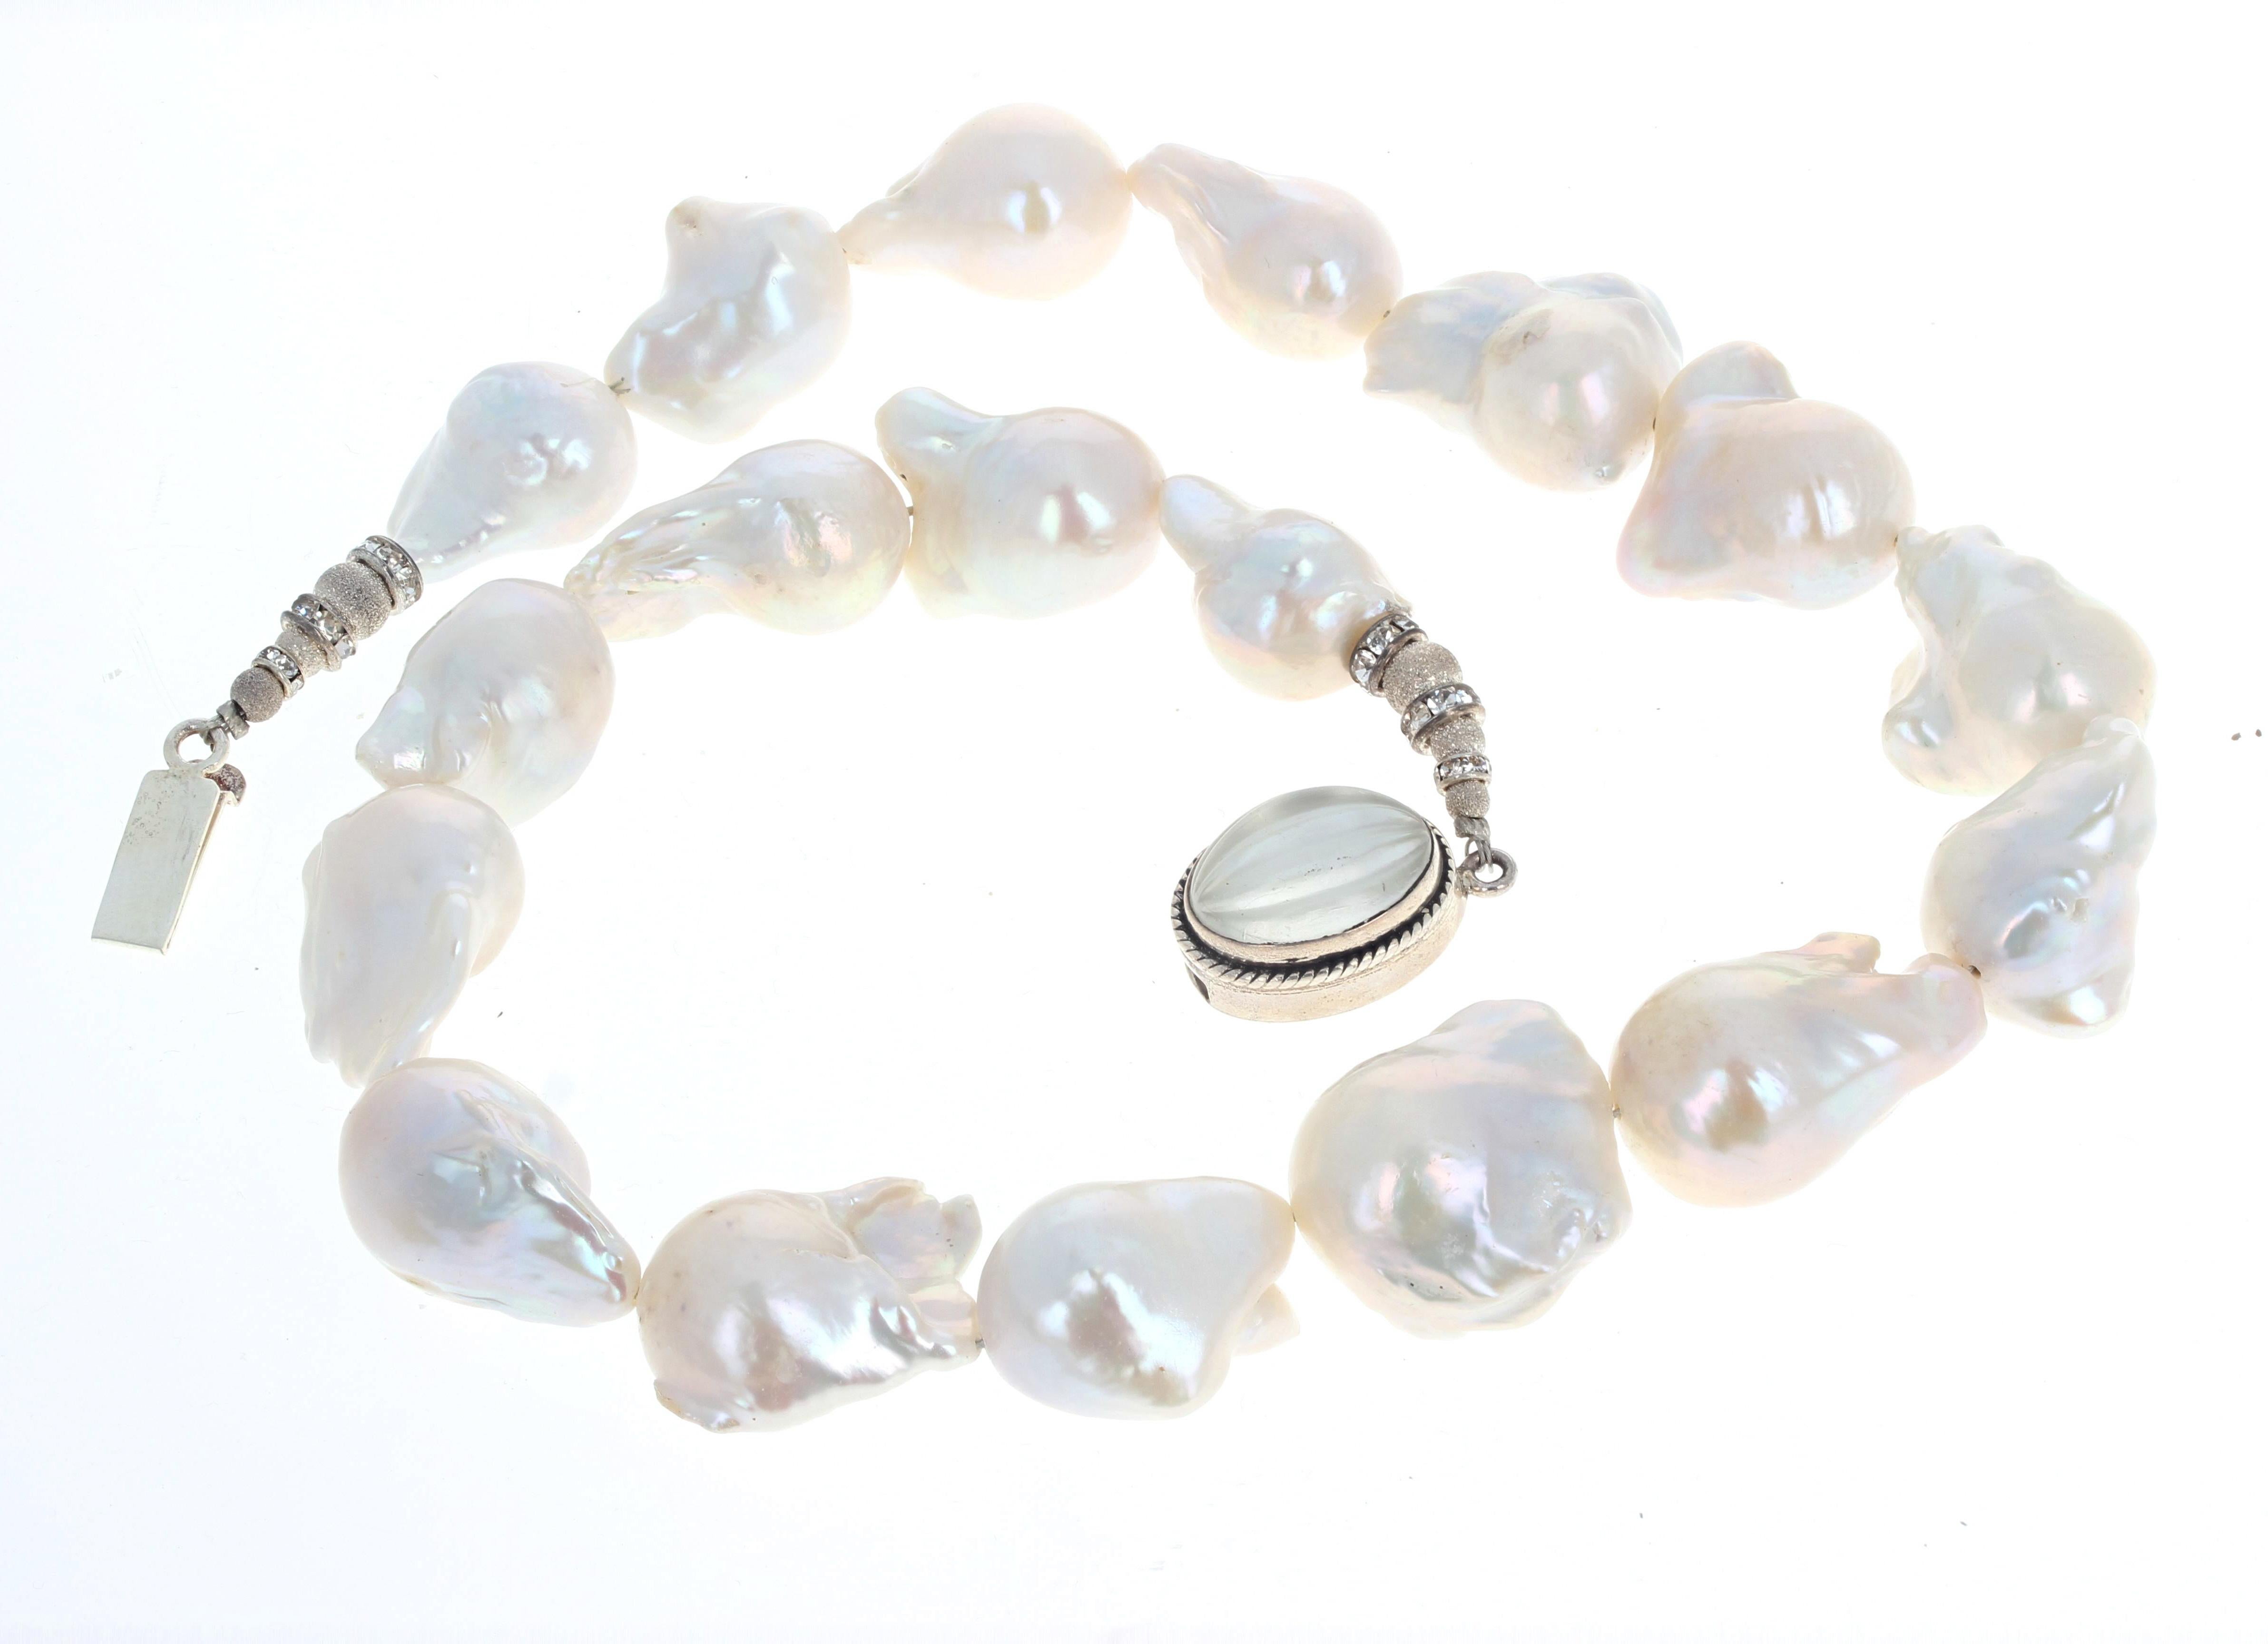 White Natural HUGE Baroque Pearls set in this beautiful 20 inch long necklace.  The largest Pearls are approximately 24mm x 21 mm.  The silver clasp is an easy to use slide-in clasp.  Absolutely gorgeous around your neck.  